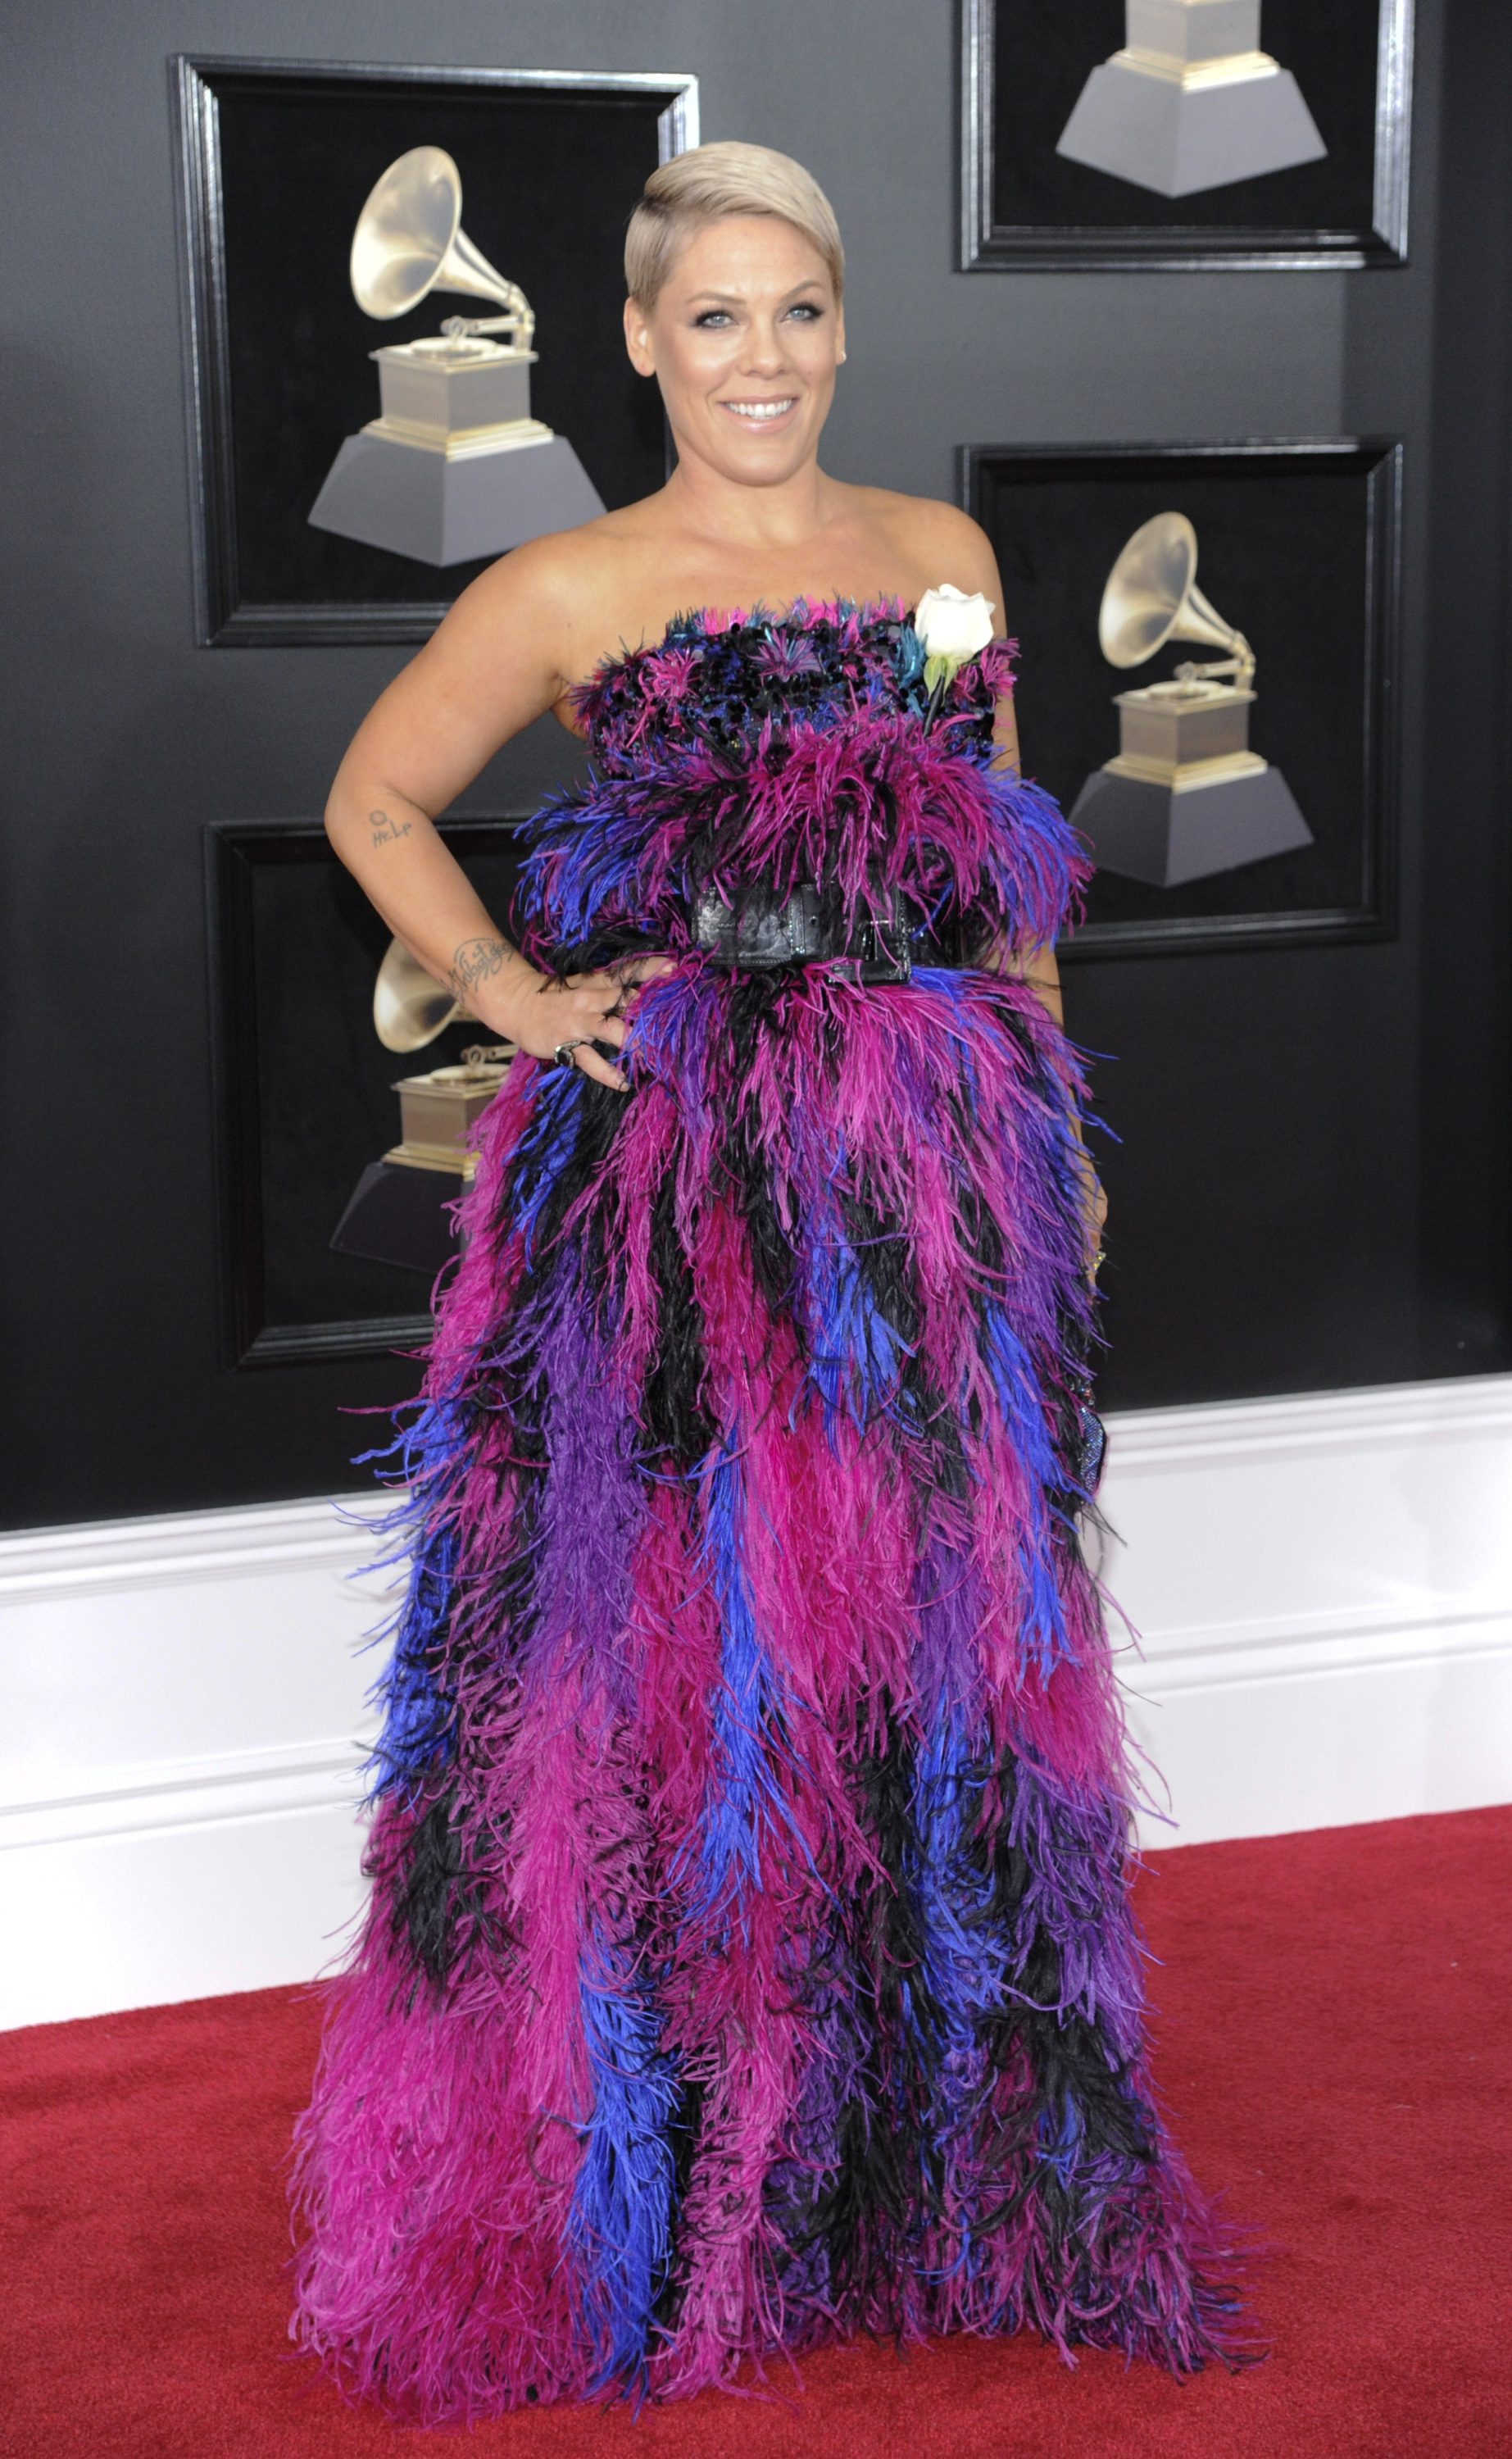 Pink is getting slammed over the dress she wore to the Grammy’s